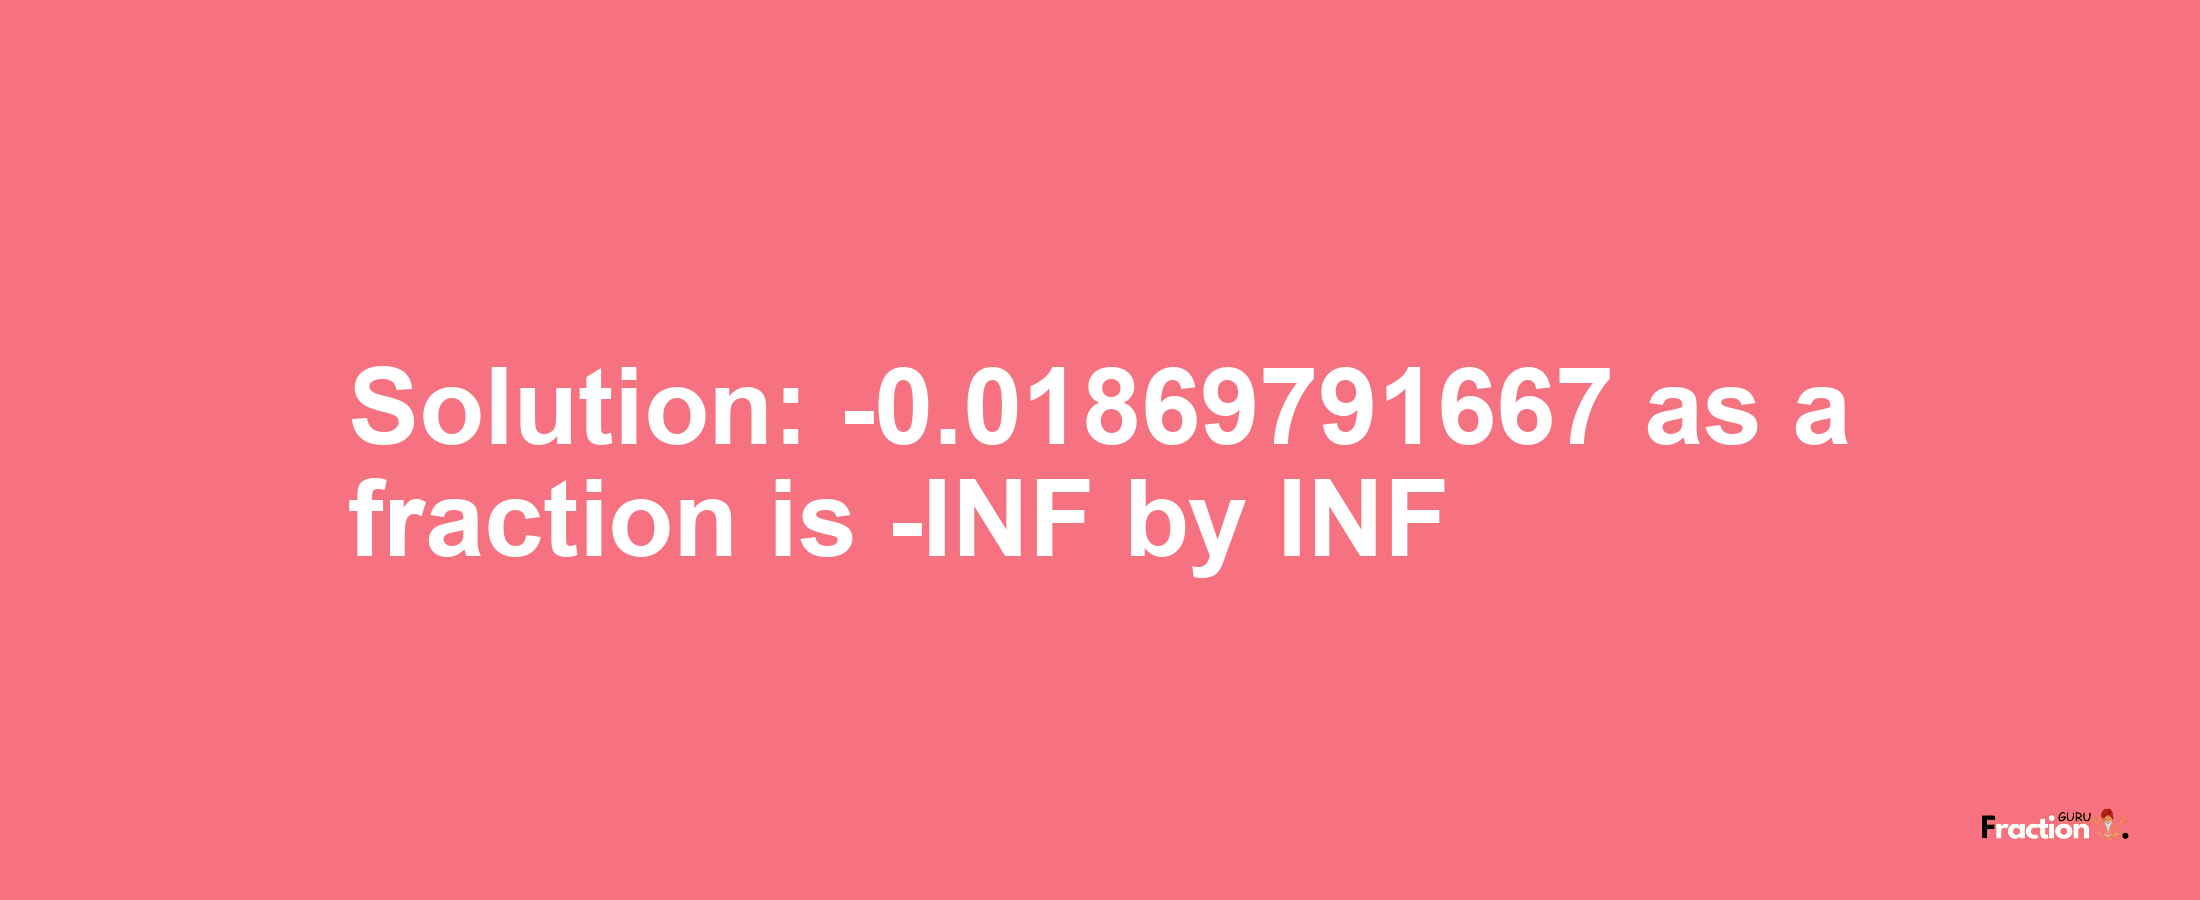 Solution:-0.01869791667 as a fraction is -INF/INF